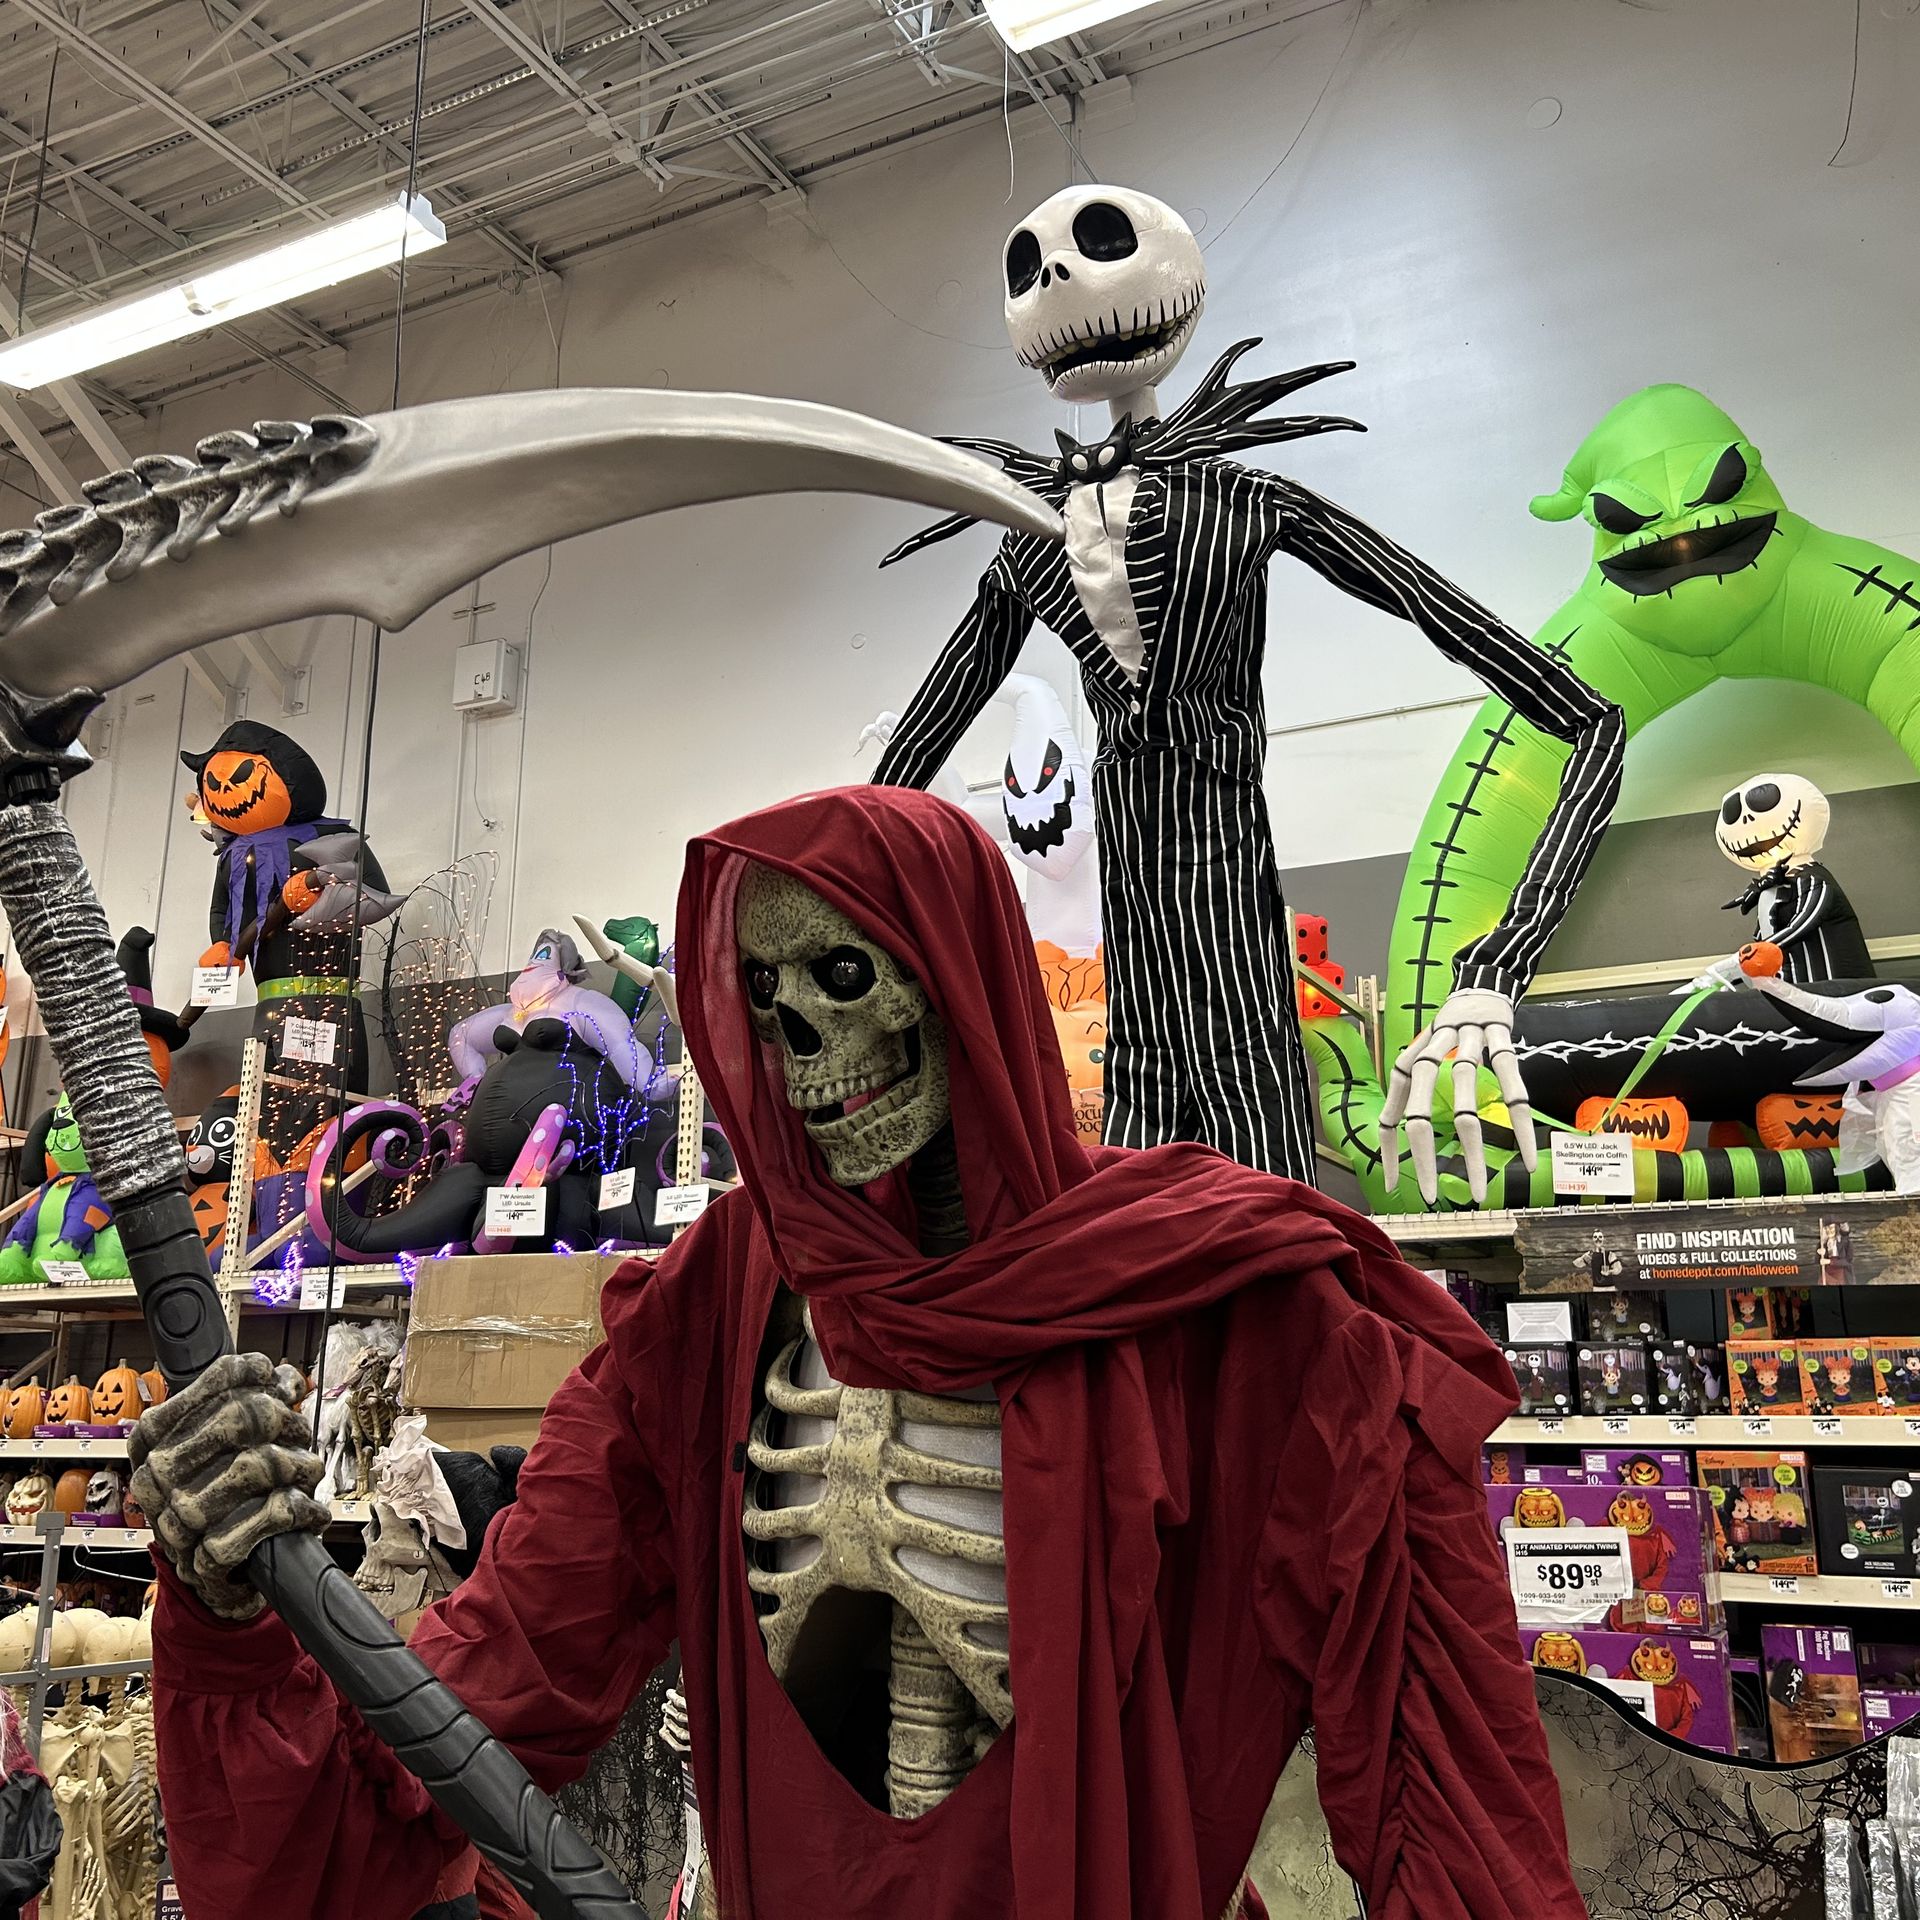 Halloween: Have the best holiday with these costumes, decorations and more